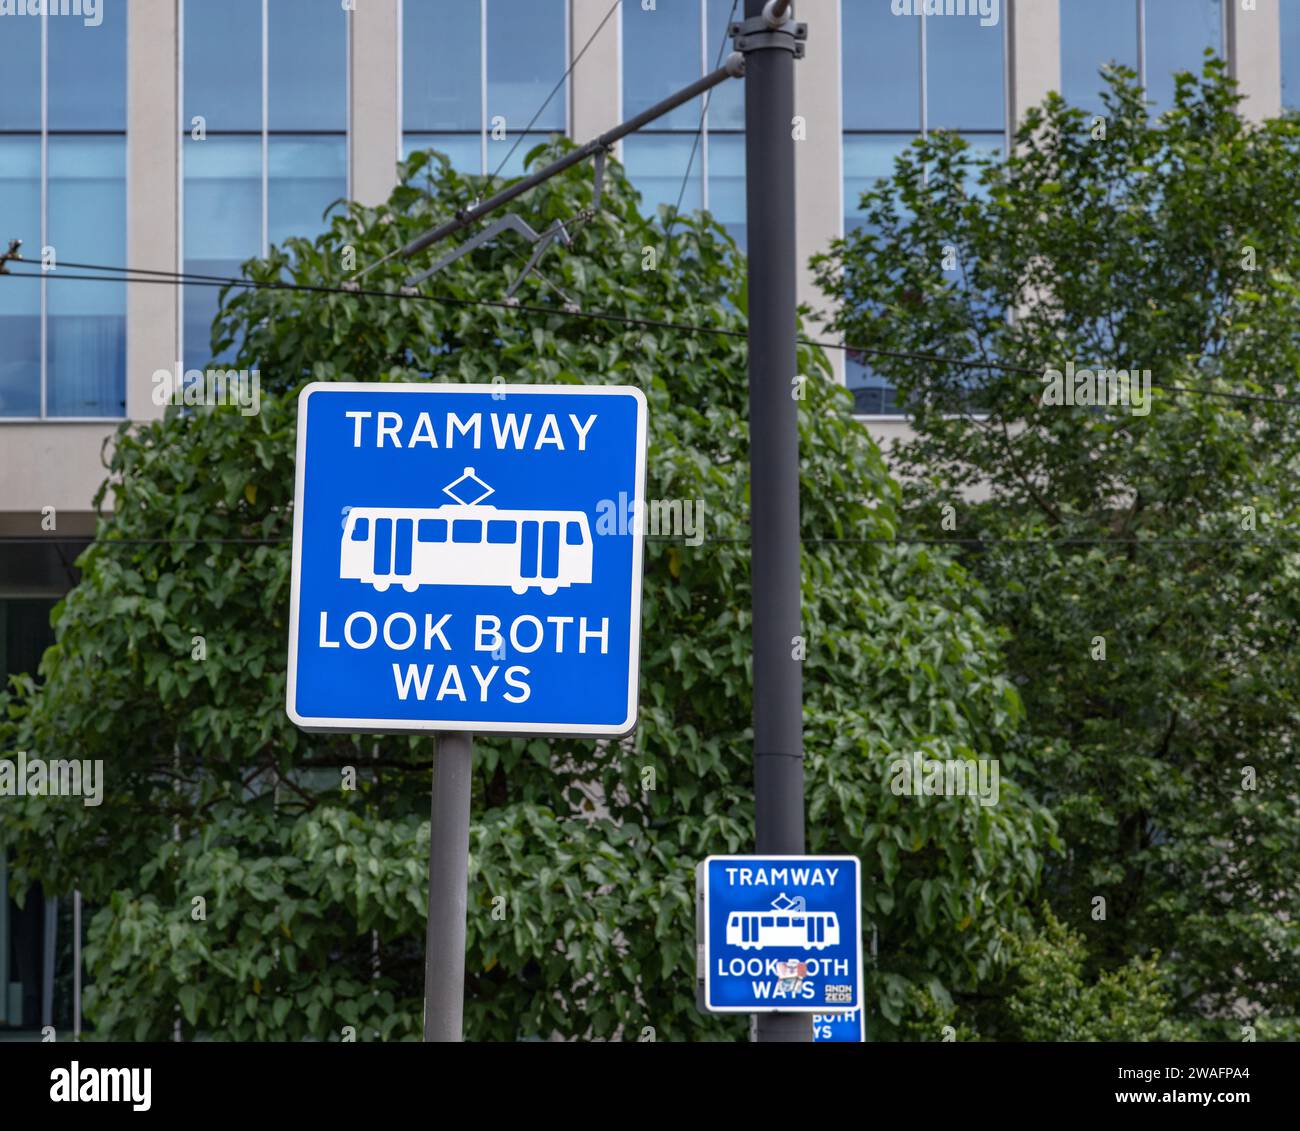 A UK street sign advising pedestrians to look both ways.at a tramway. A blue road sign advising of a tramway. Stock Photo